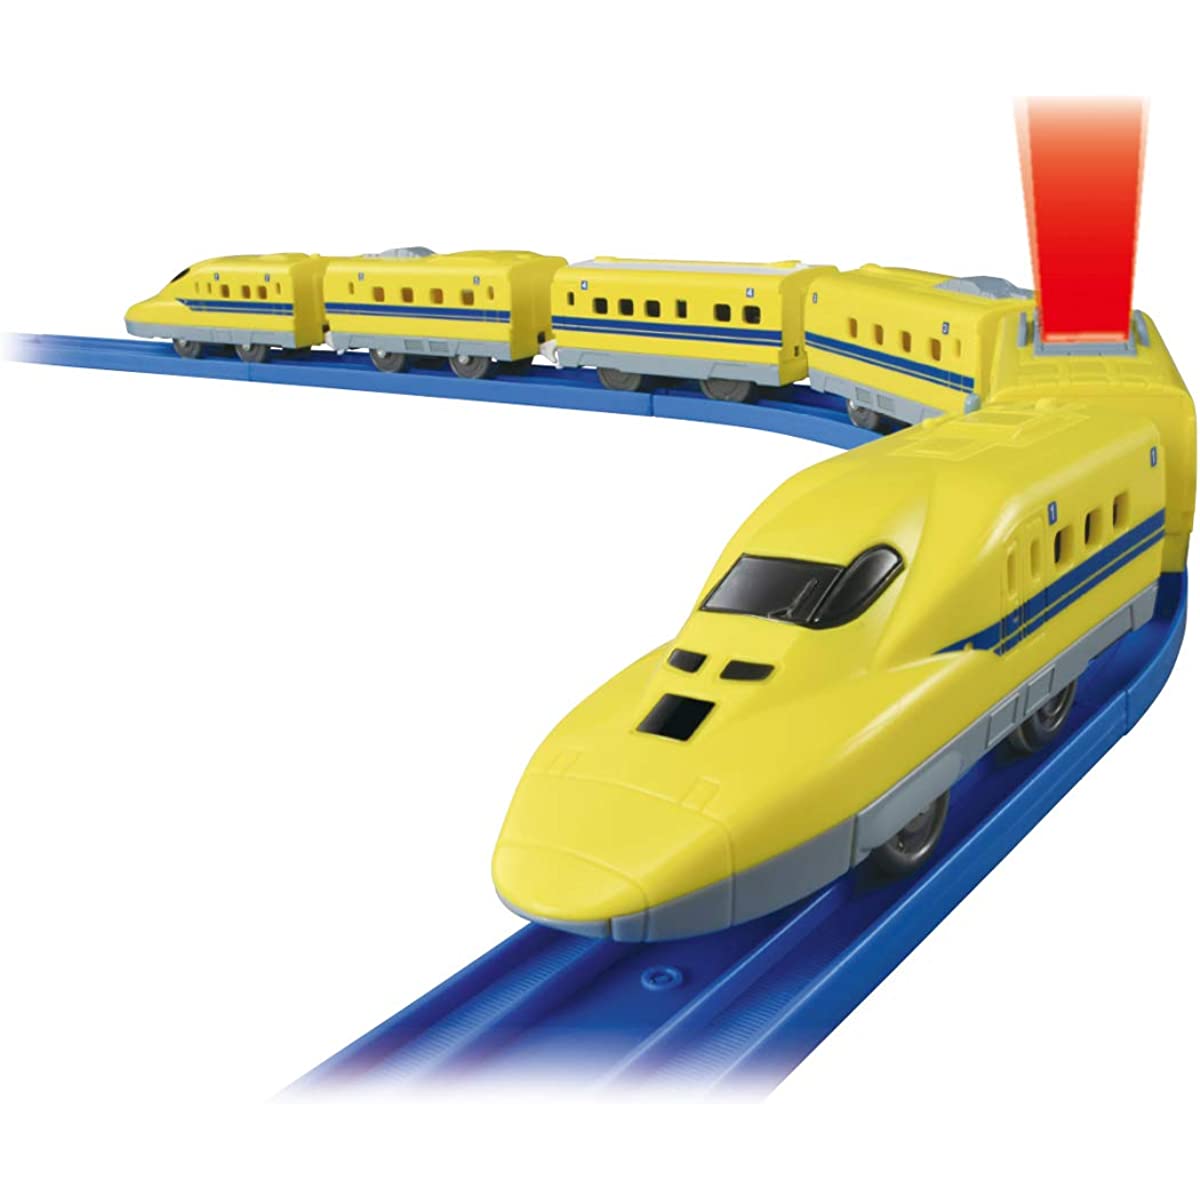 Takara Tomy Plarail 923 Type Doctor Yellow, Train, Toy, Ages 3 and Up, Pass  Toy Safety Standards, ST Mark Certified